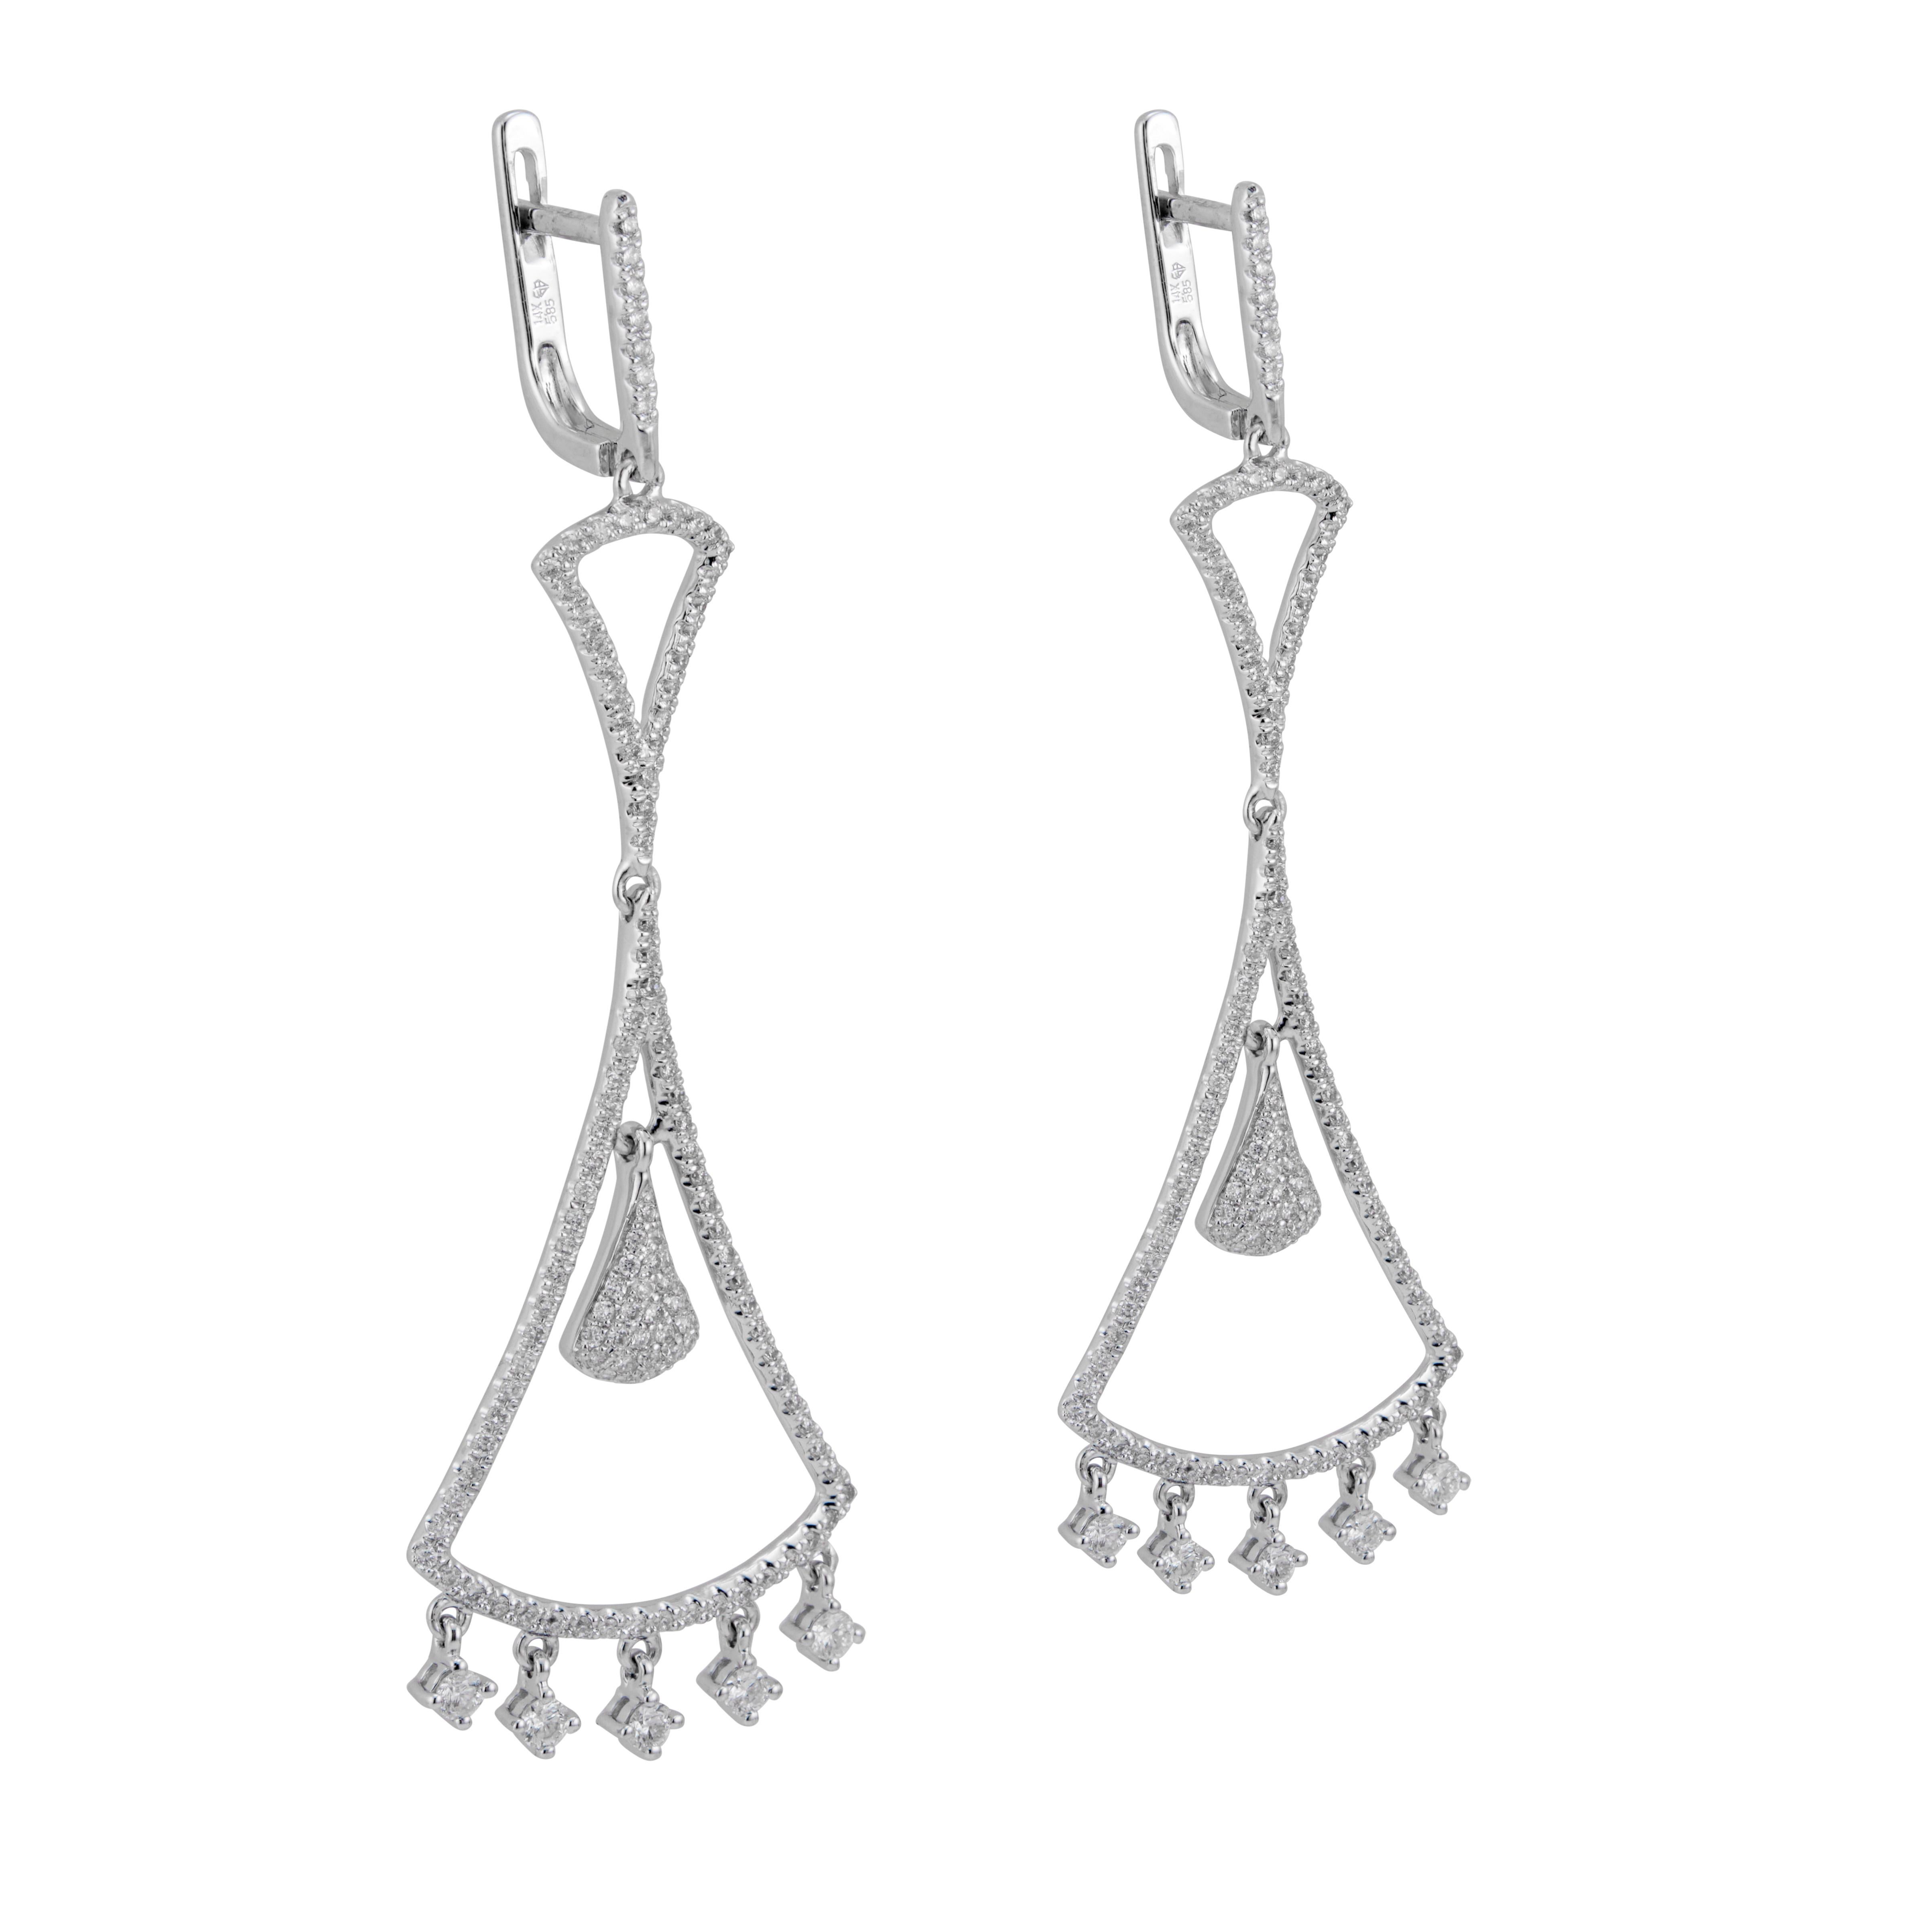 Designer GB diamond earrings. 254 round cut diamonds in 14k white gold chandelier dangle earrings with pave diamond dangles.   Post and hinged clip top.

254 round diamonds, approx. total weight 1.11cts, F-G, VS – SI
14k white gold
Tested and